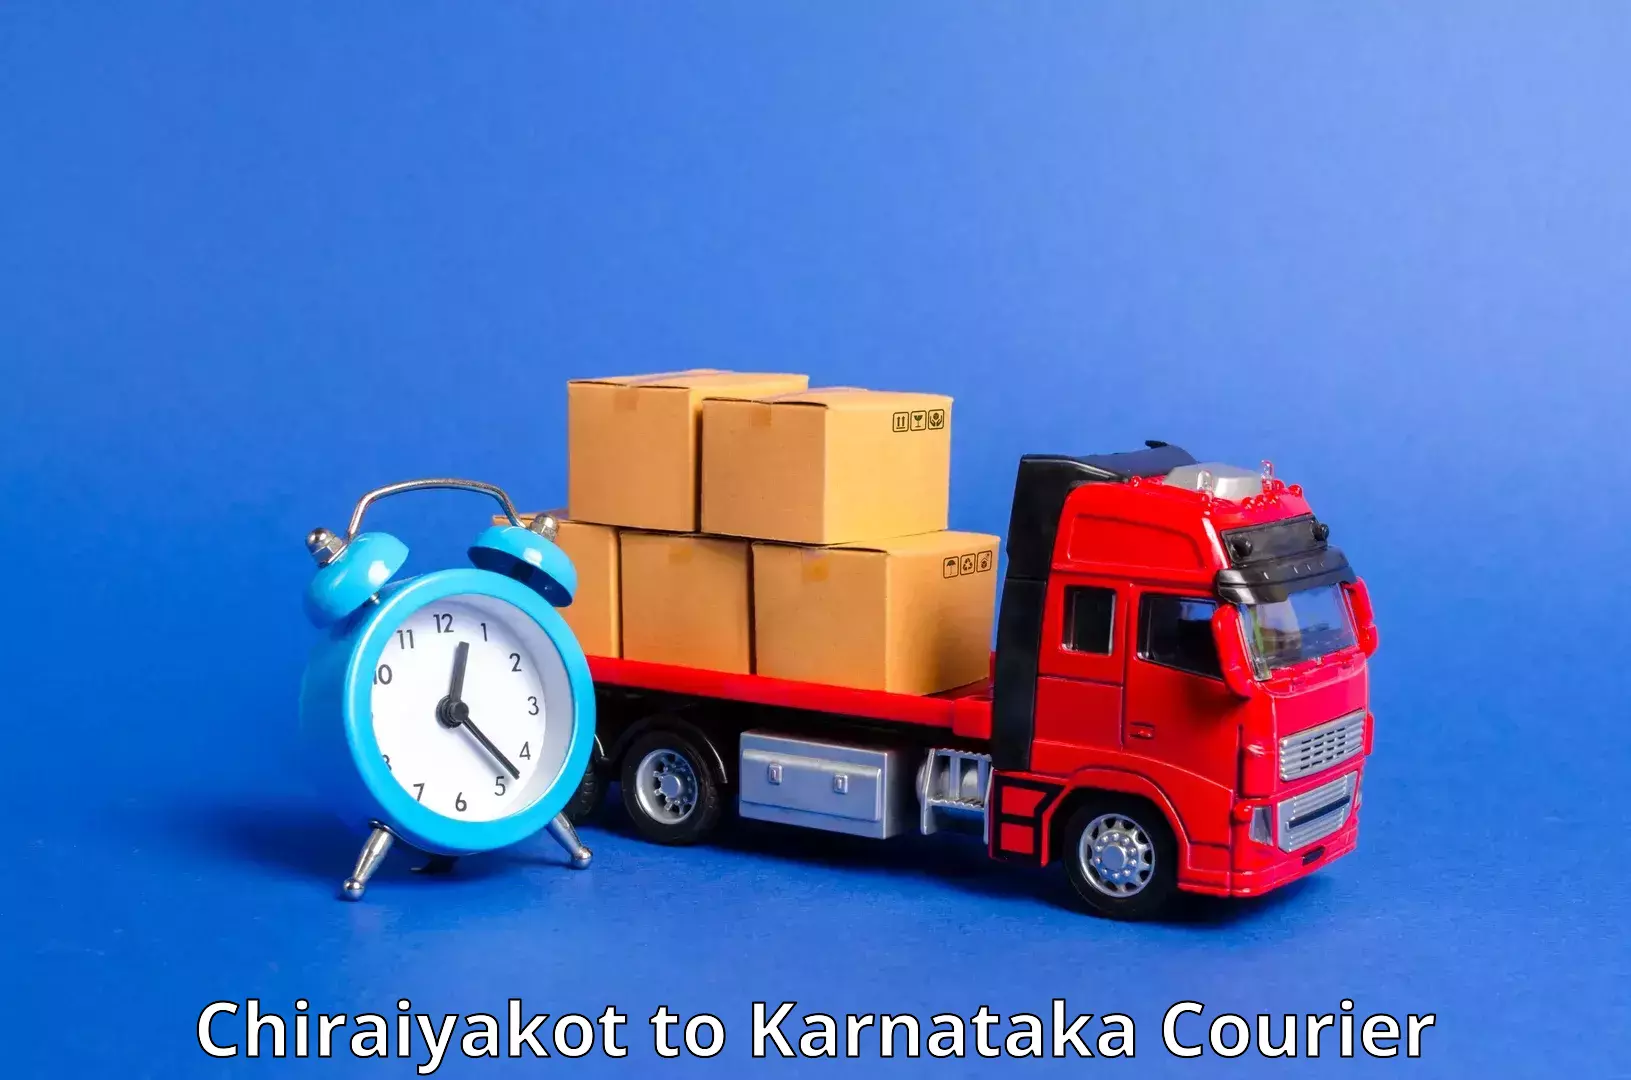 State-of-the-art courier technology Chiraiyakot to Manipal Academy of Higher Education